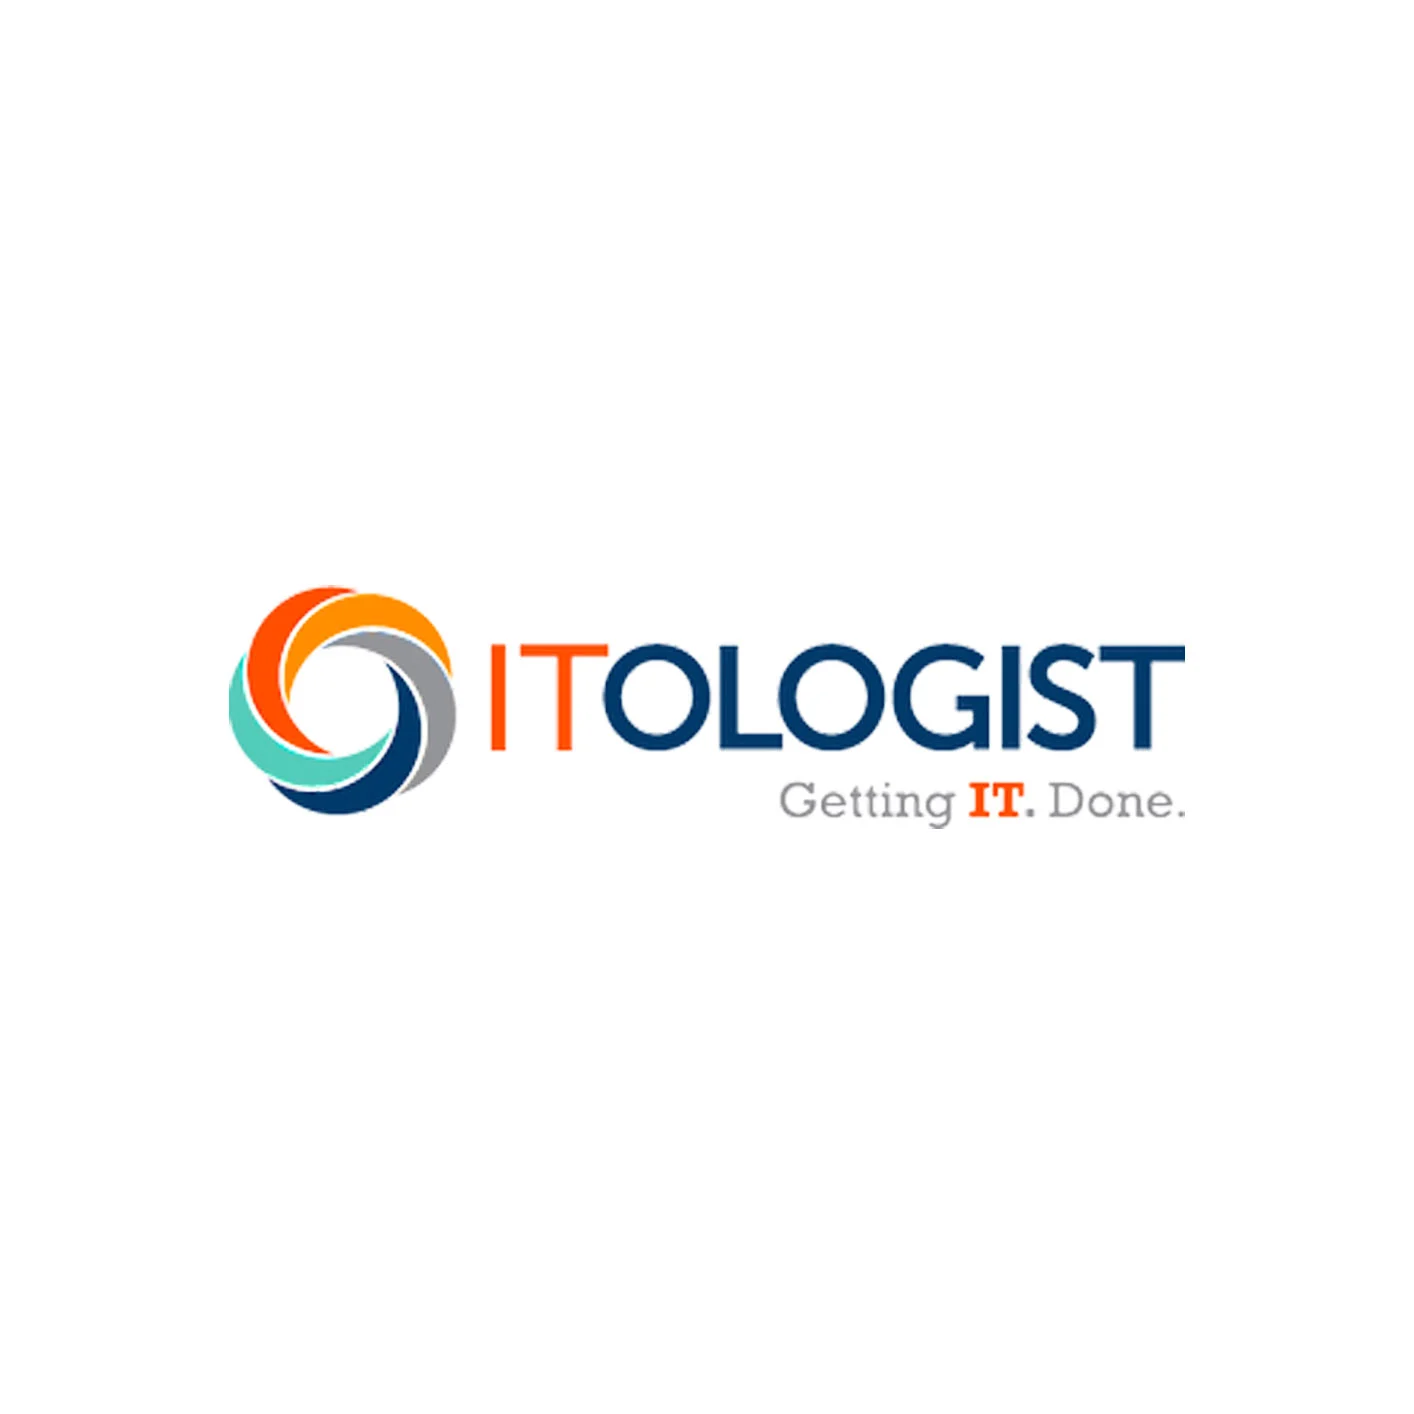 ITologist Profound Offer